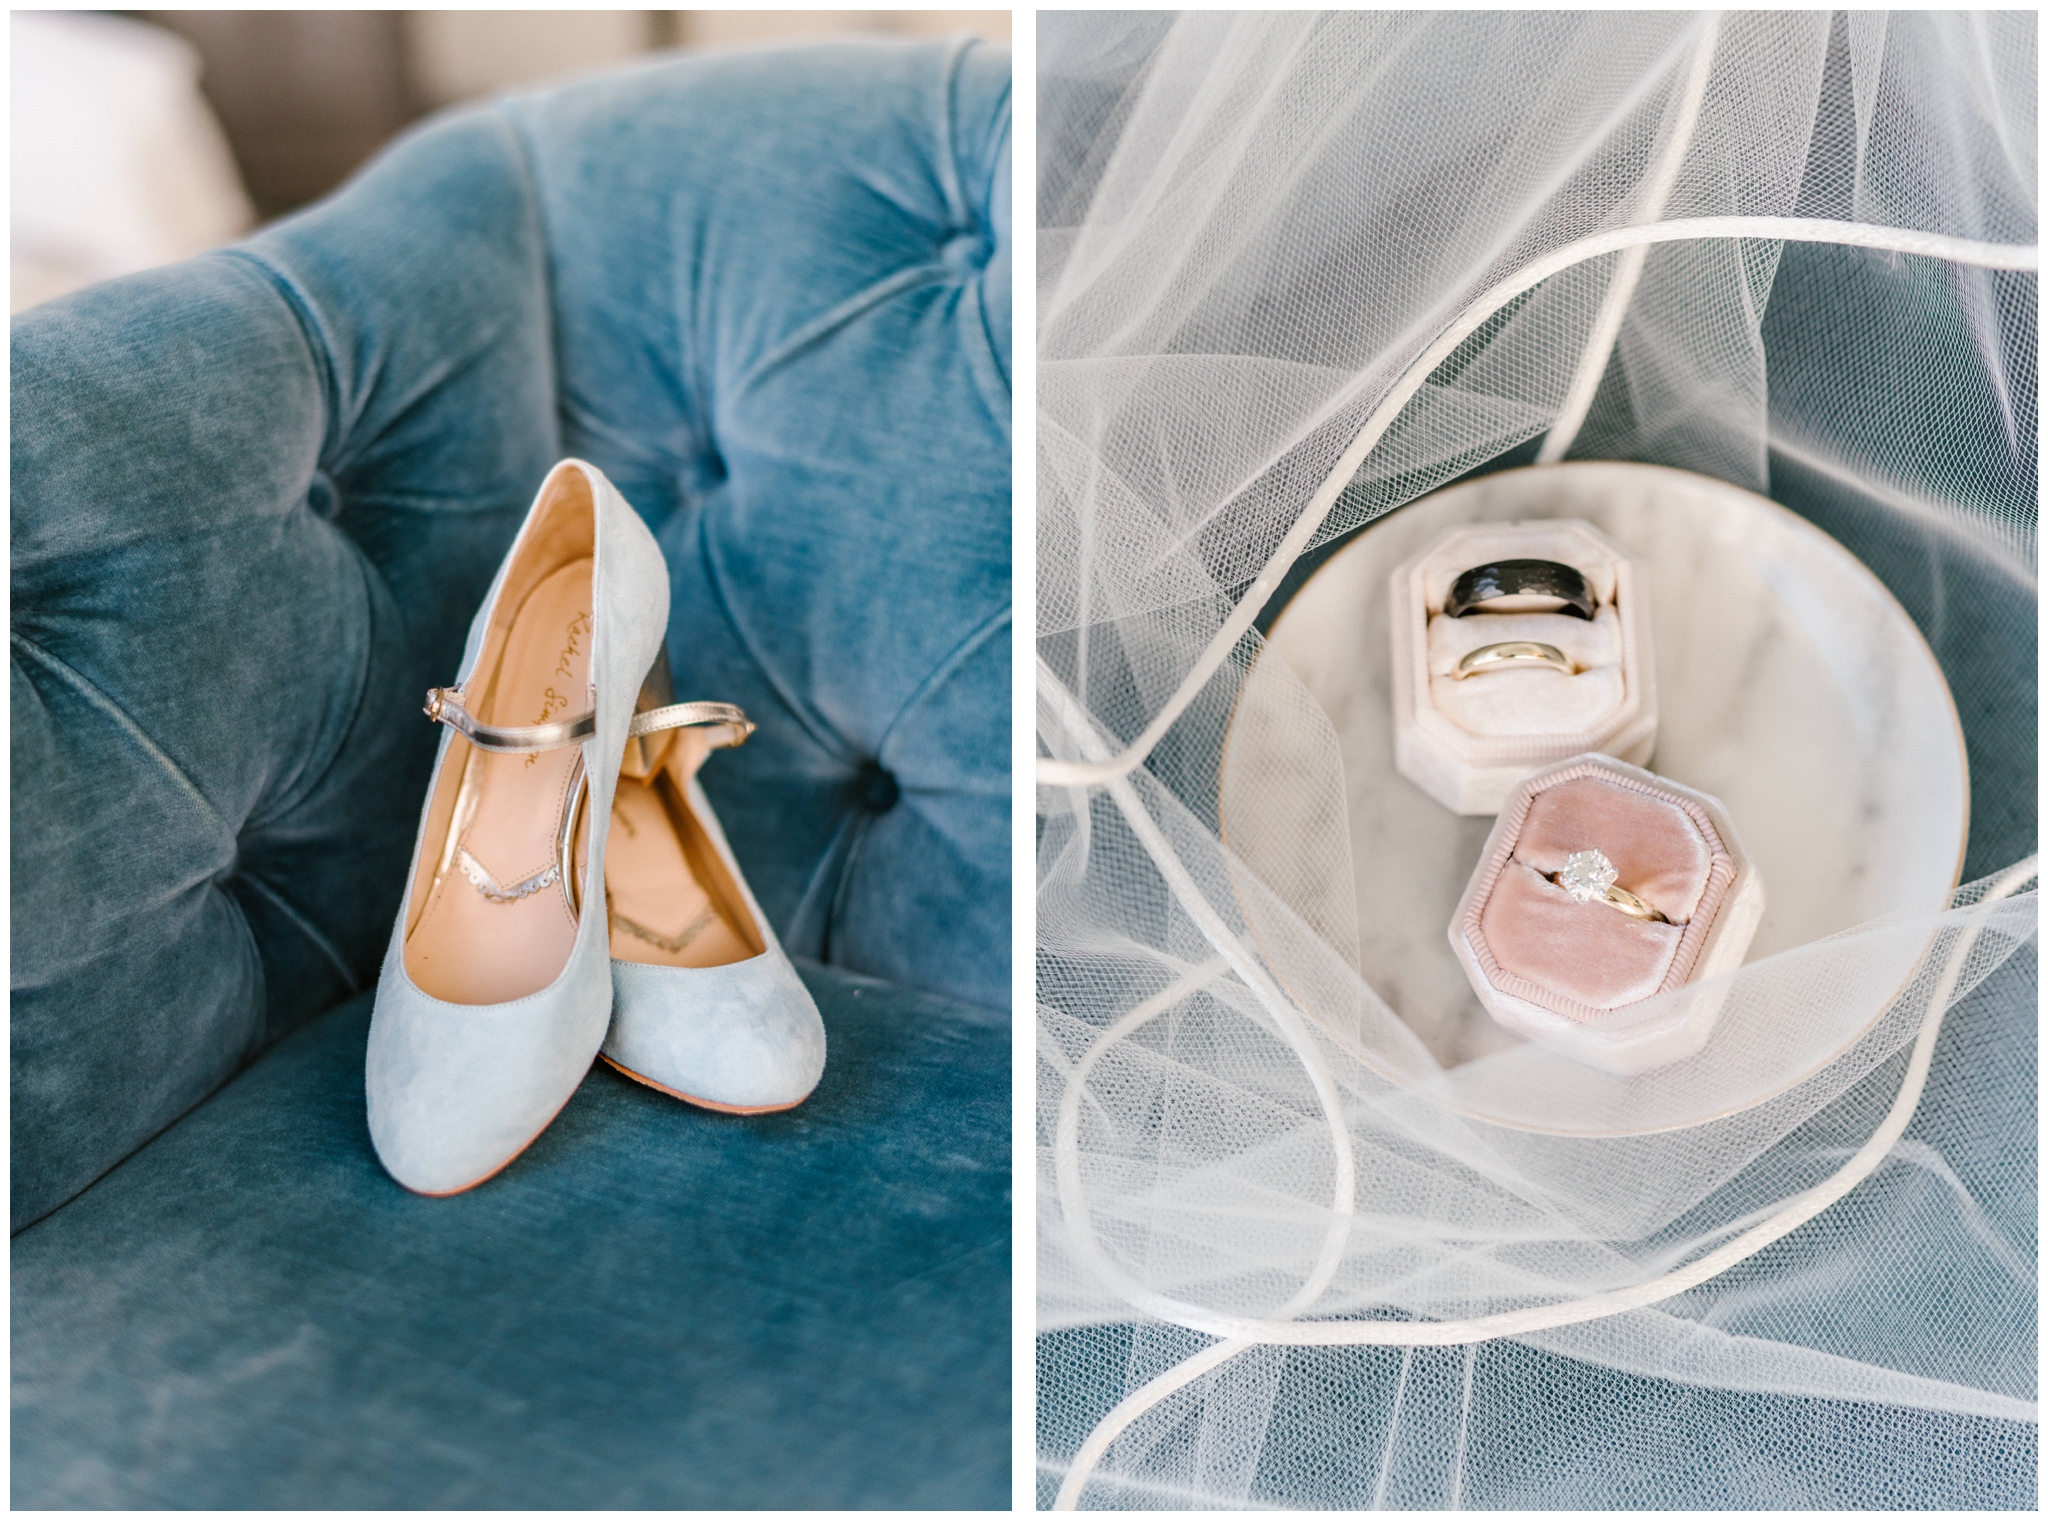 Emily and Ralph’s intimate wedding at Hotel Ella in Austin, Texas